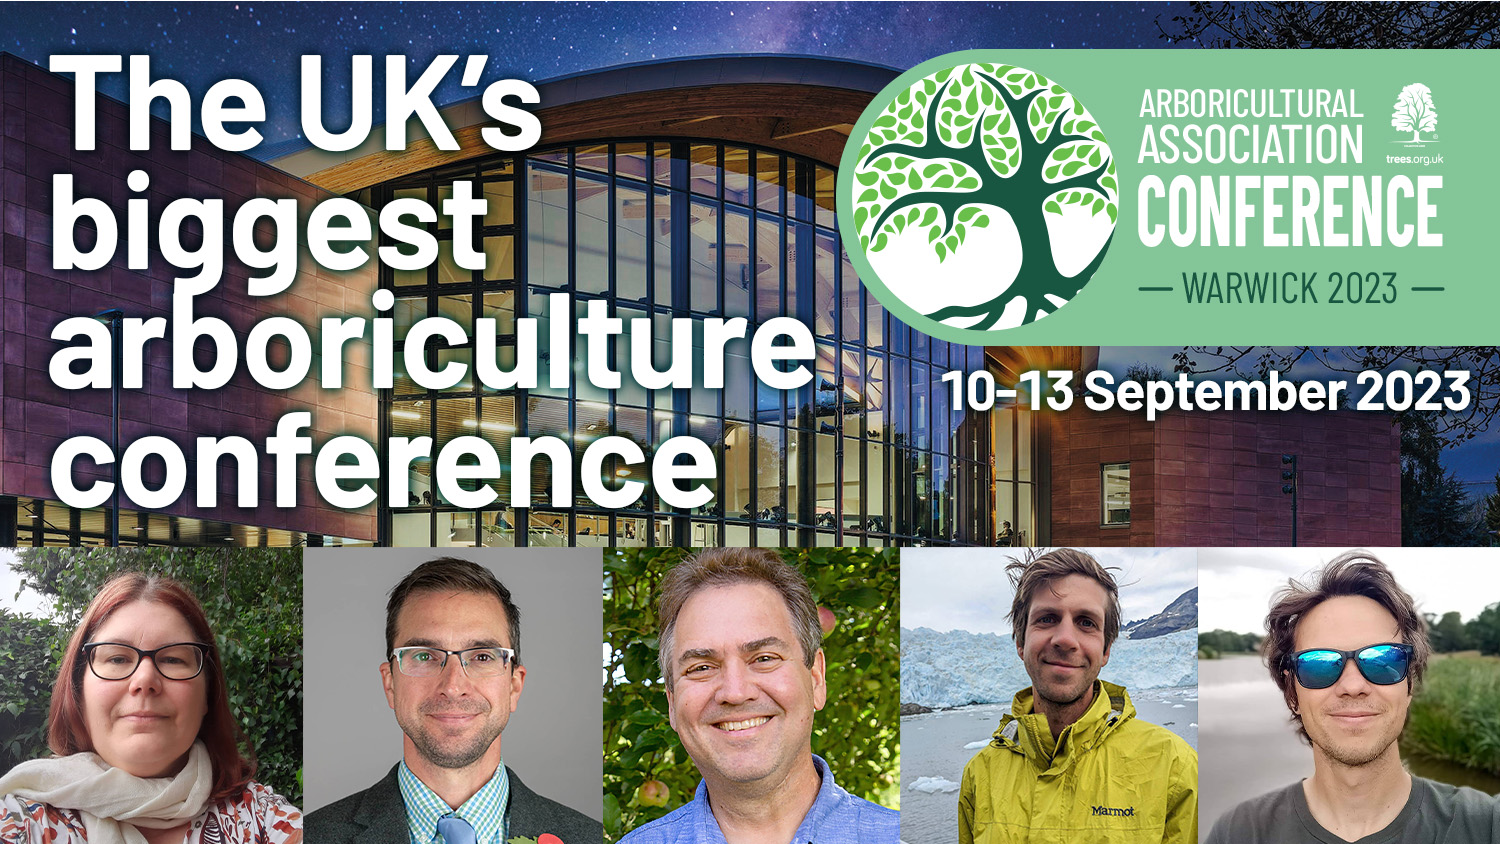 The Arboricultural Association Conference 2023 The UK’s Biggest Arboriculture Conference